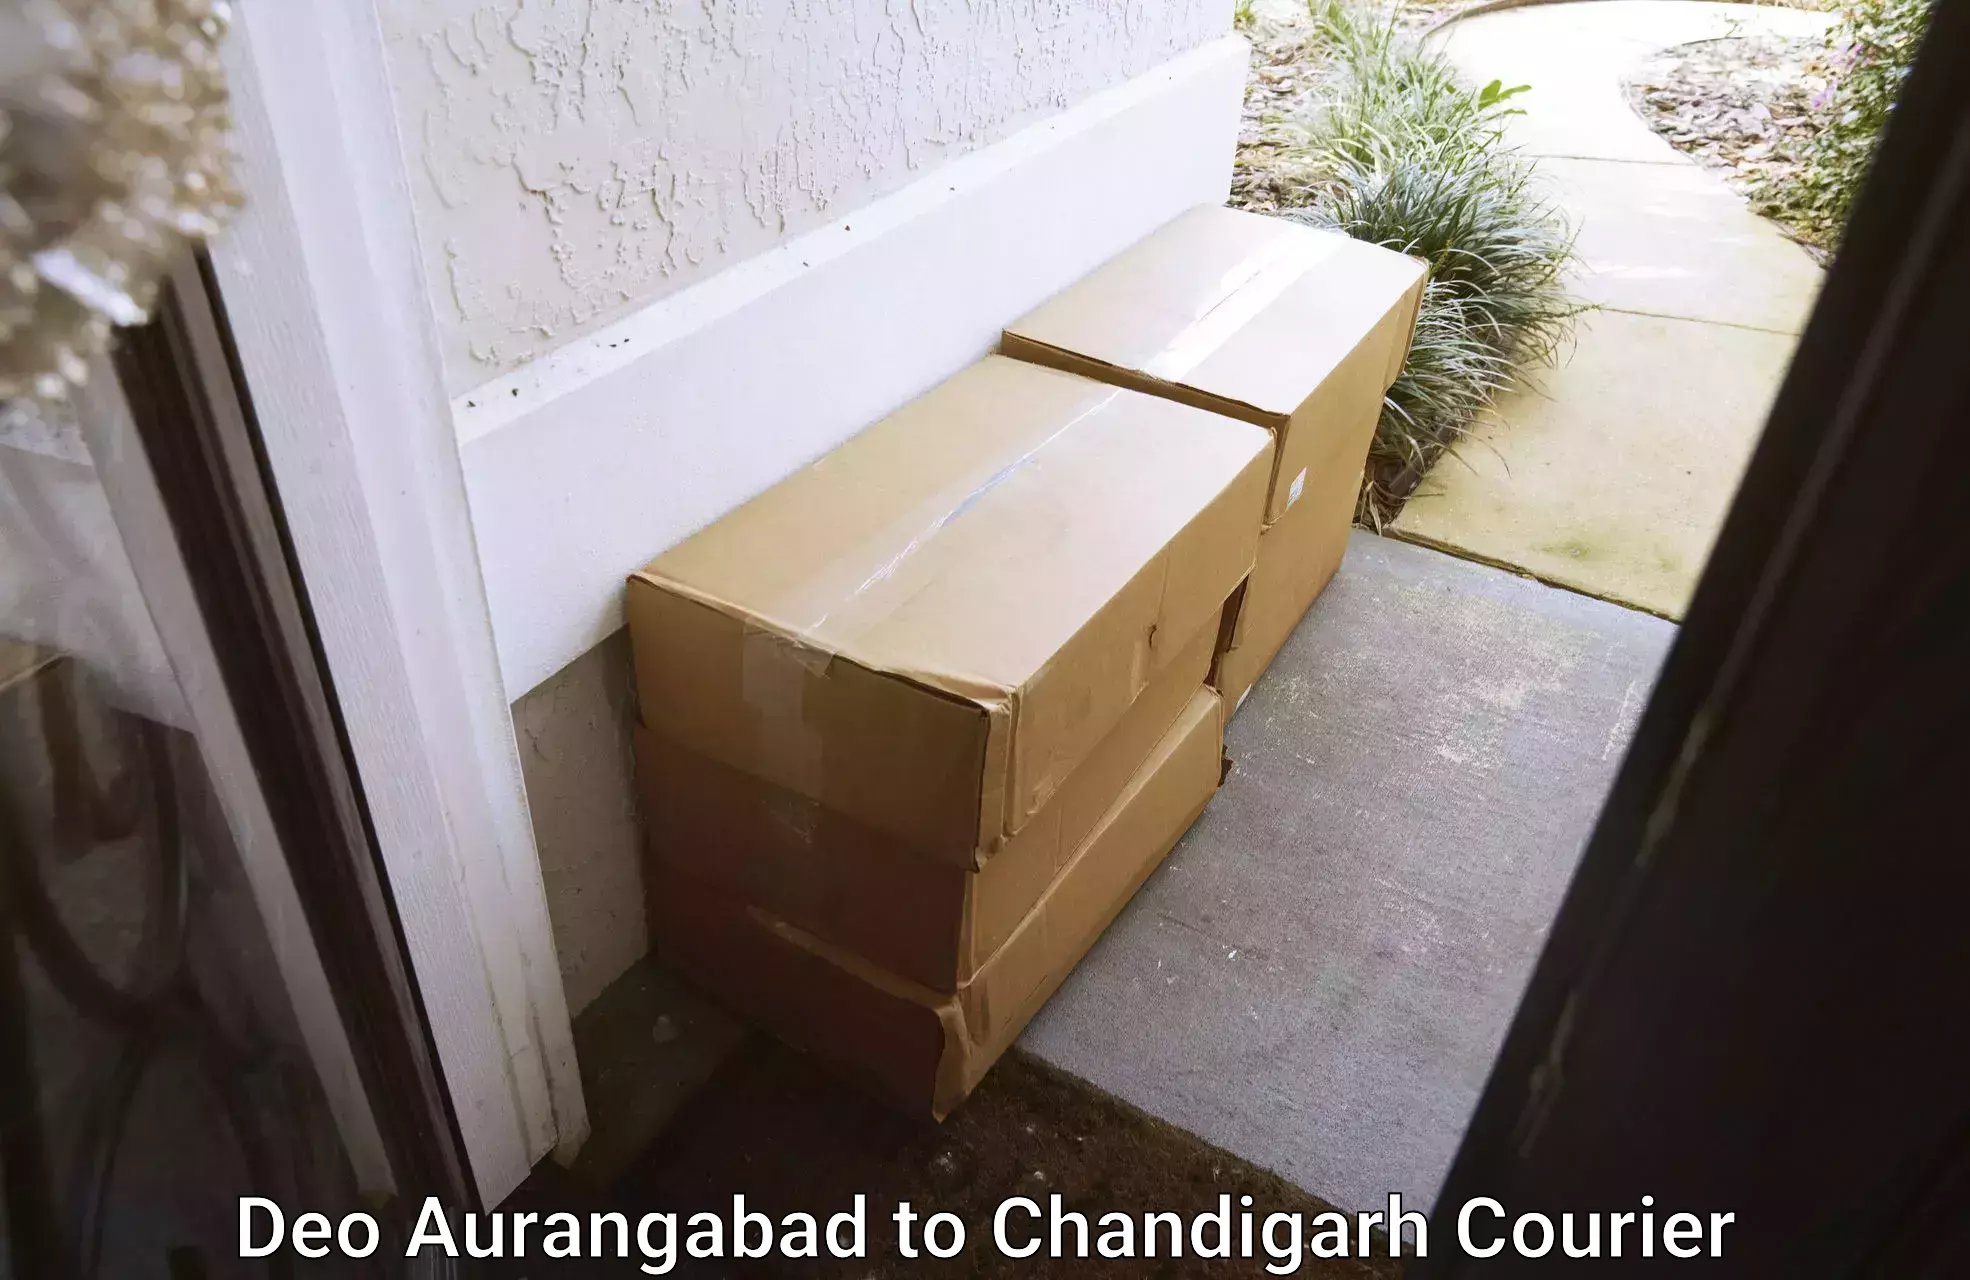 Professional packing services Deo Aurangabad to Chandigarh